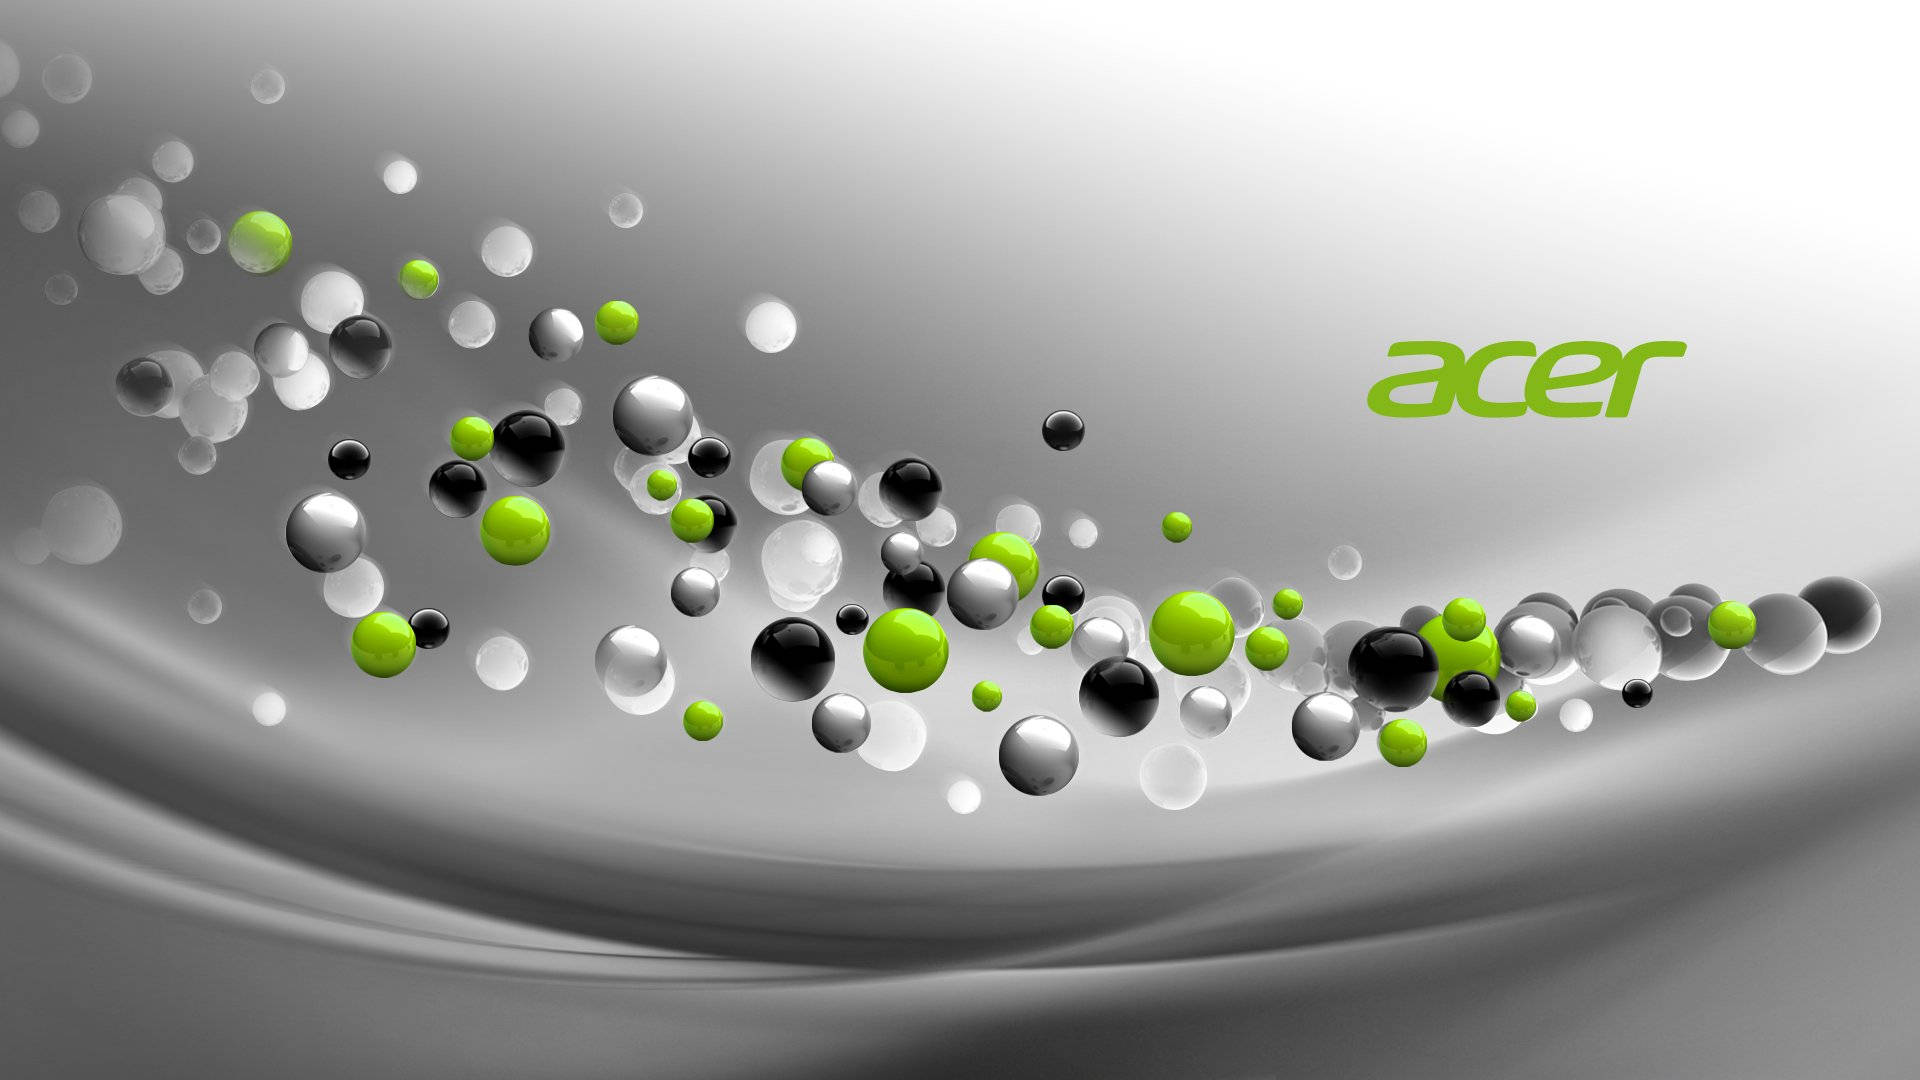 Acer Official Logo And Color Wallpaper